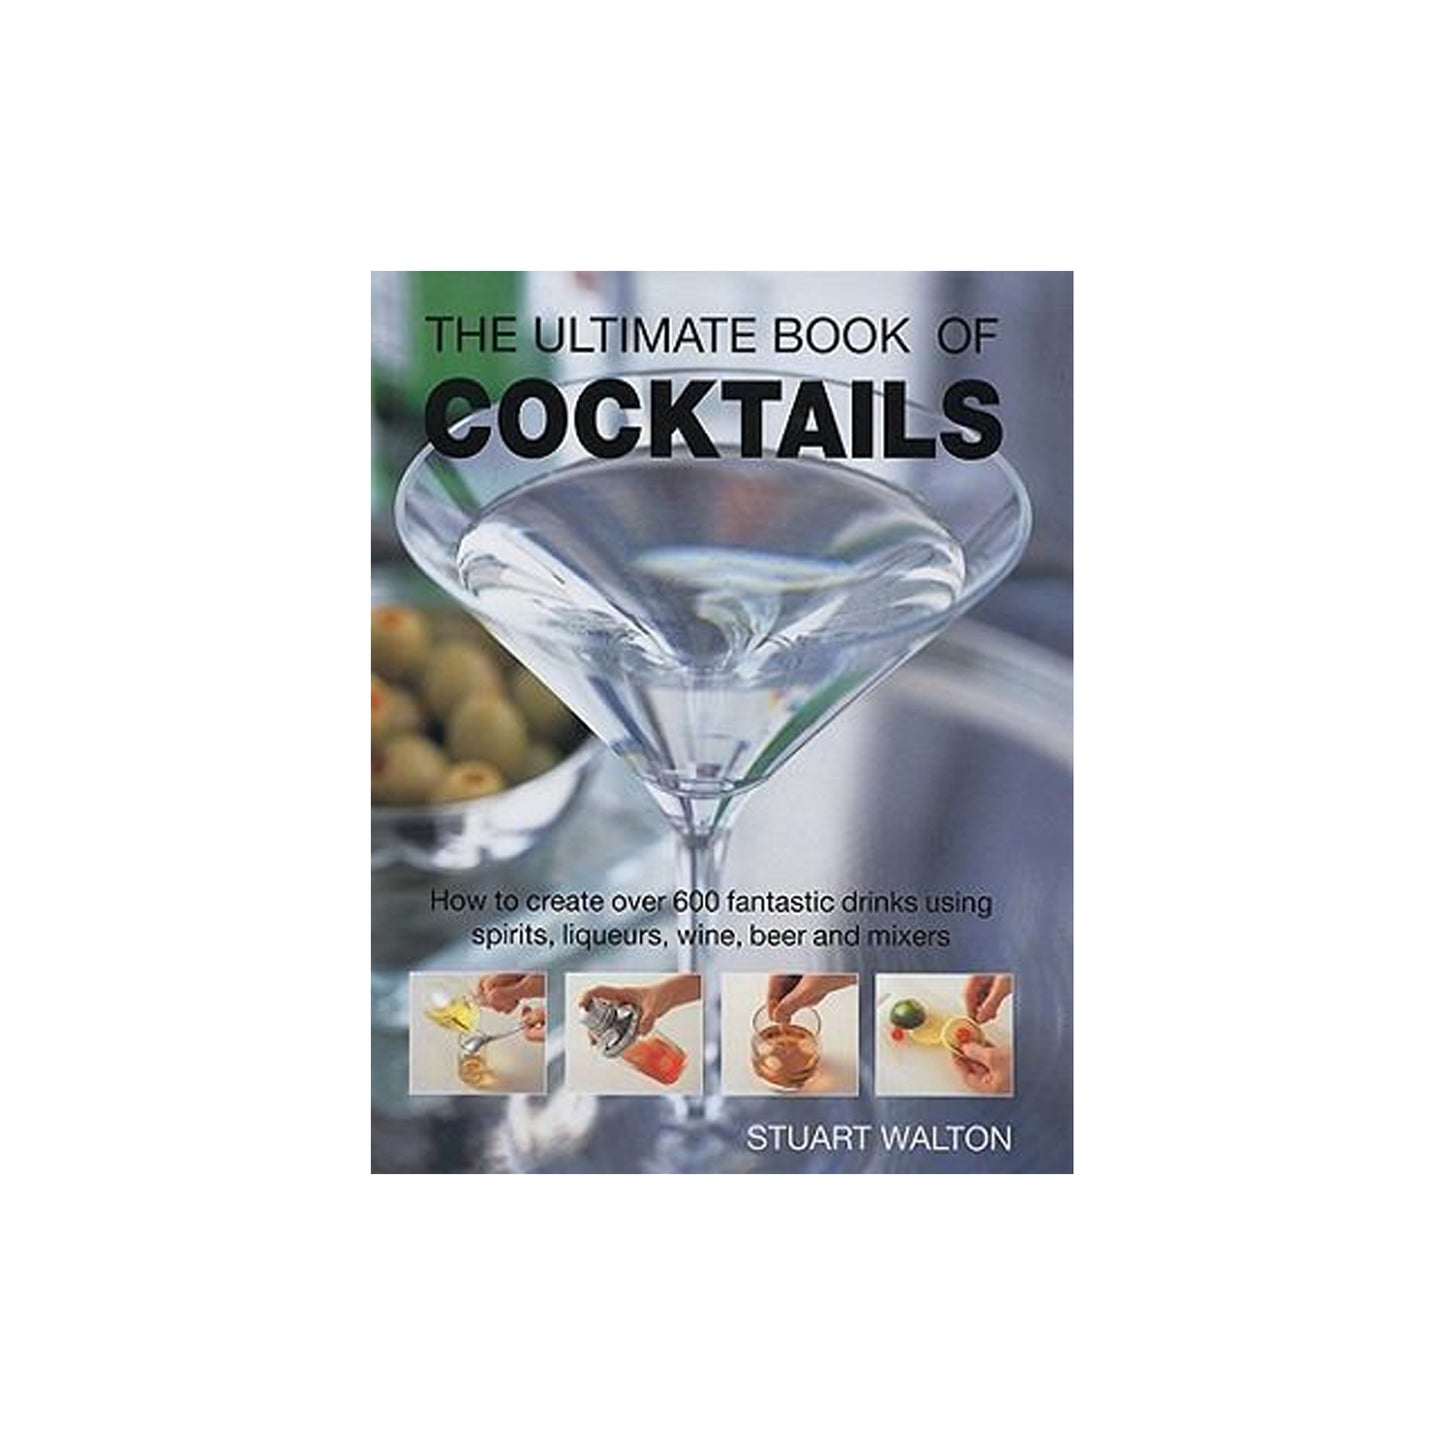 The Ultimate Book of Cocktails by Stuart Walton